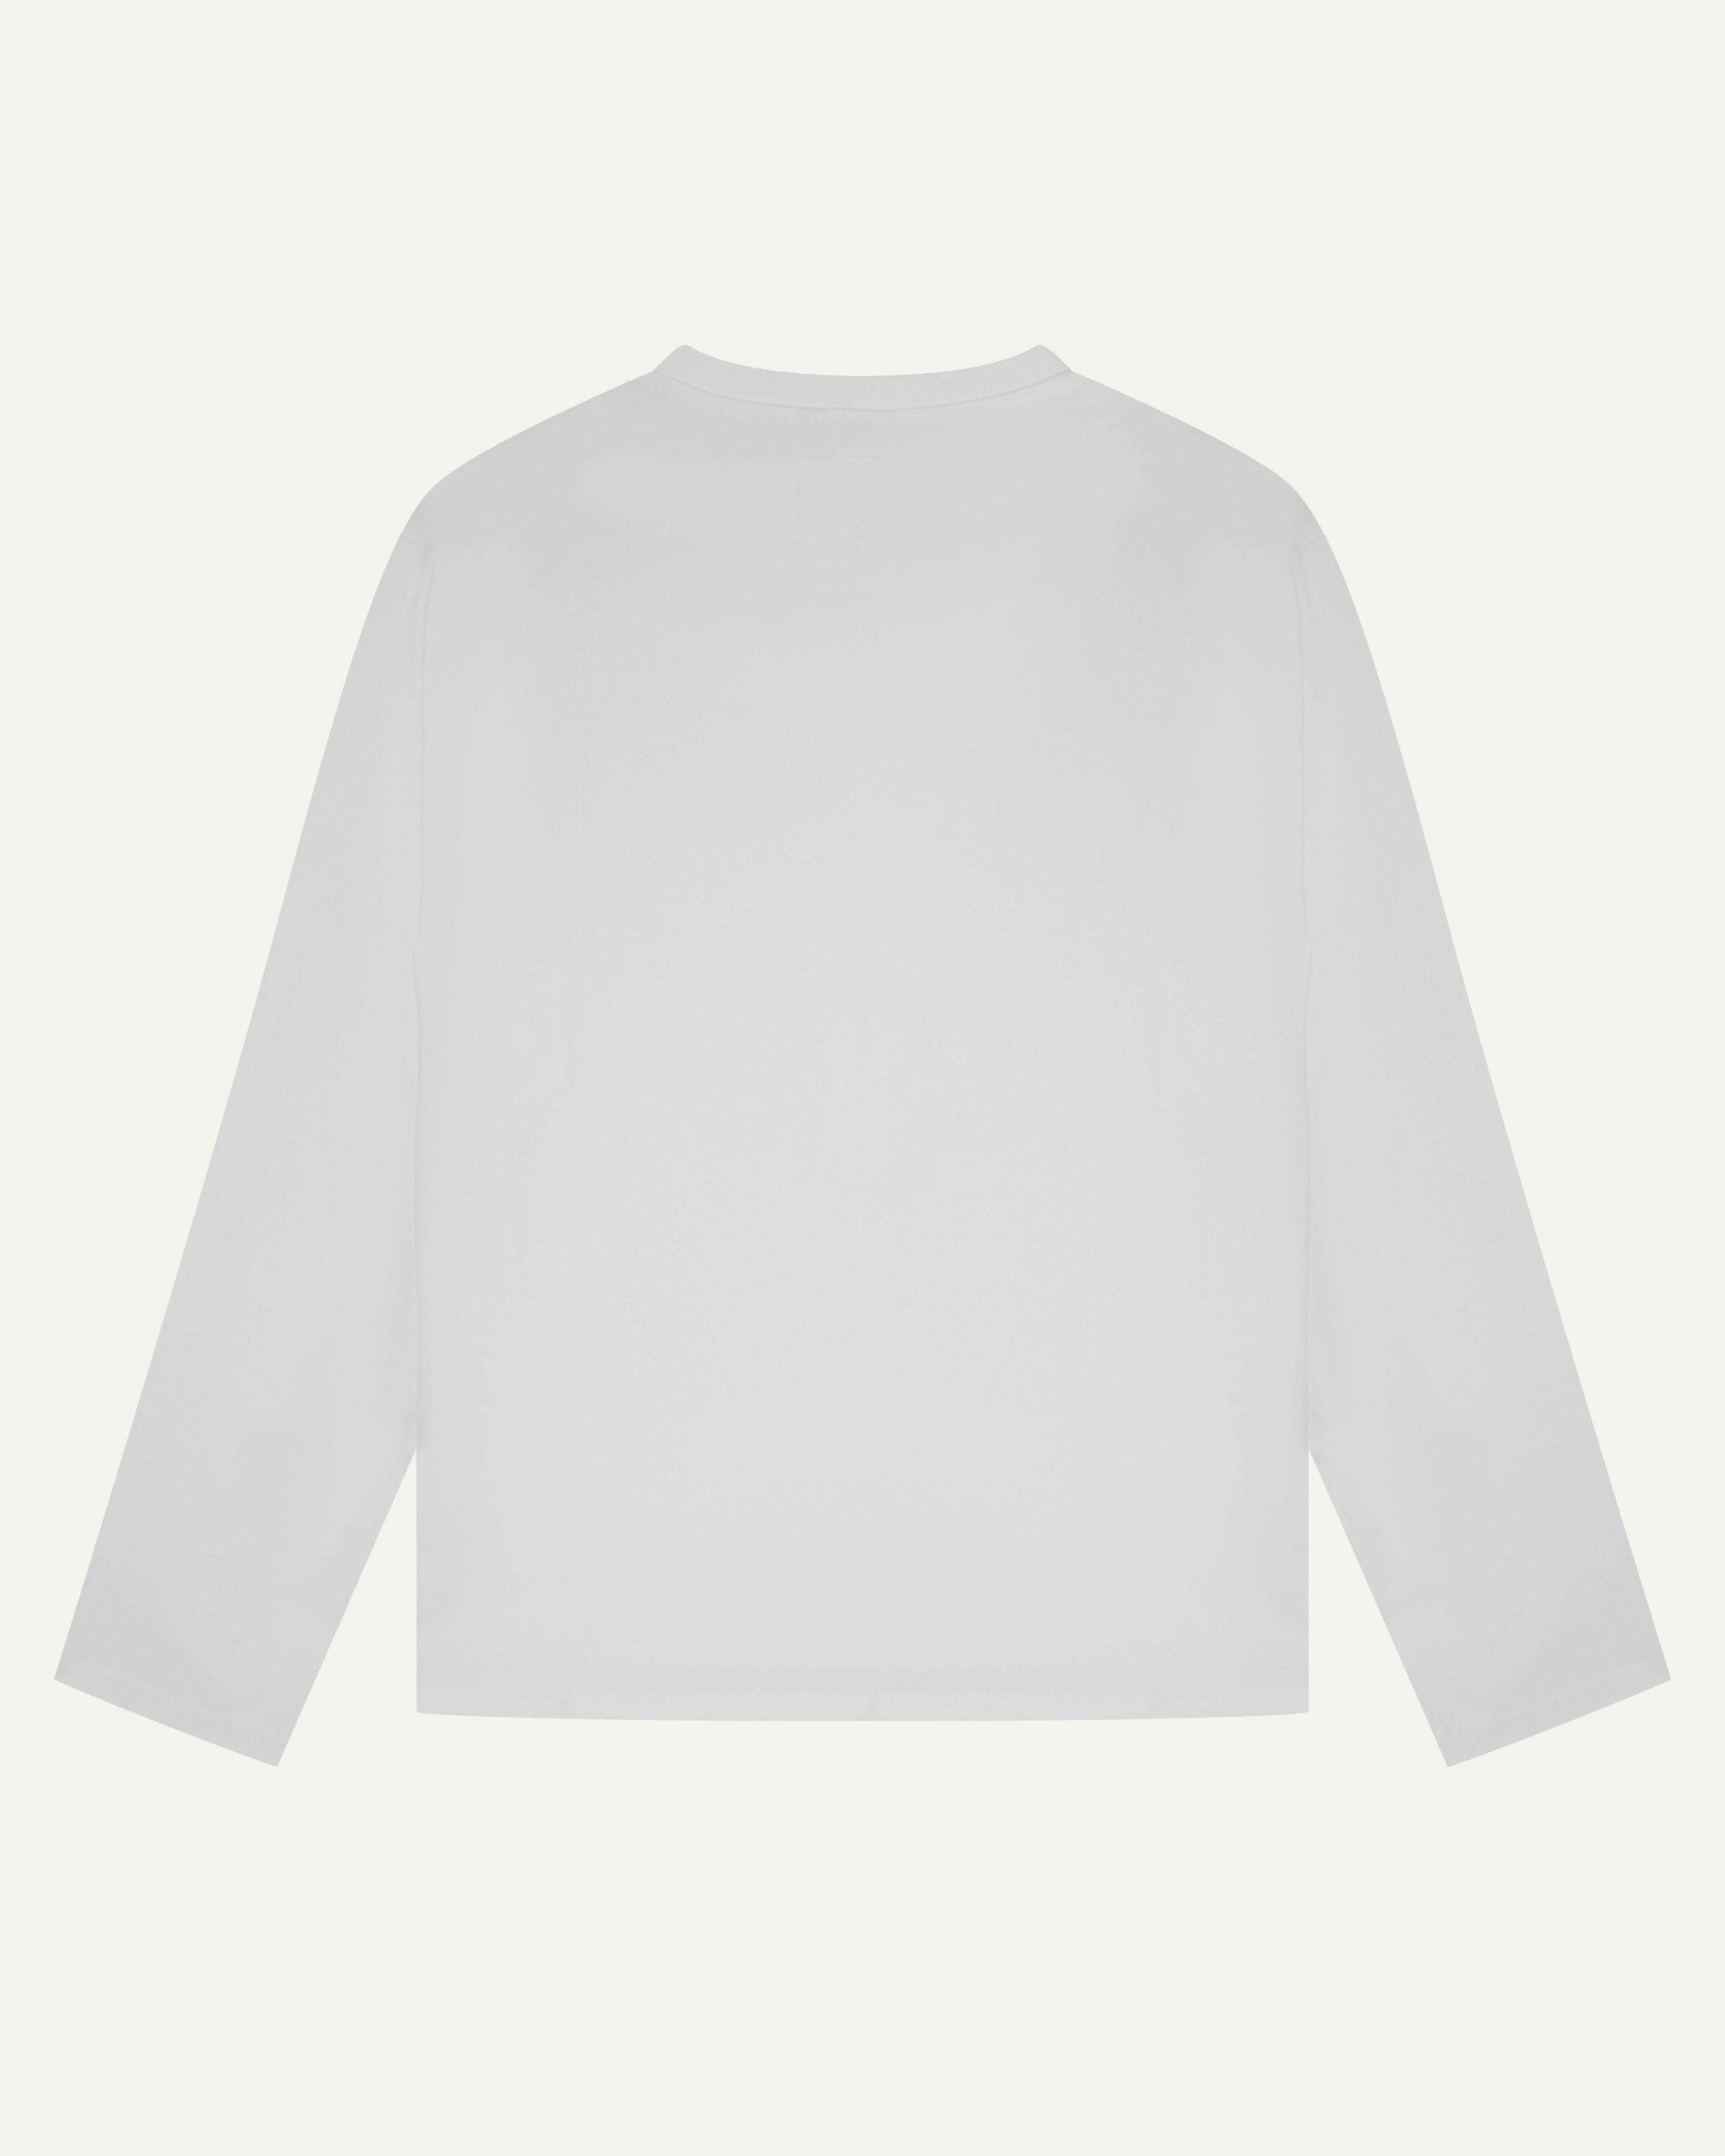 Back view of white organic cotton uskees long sleeved Tee for men.